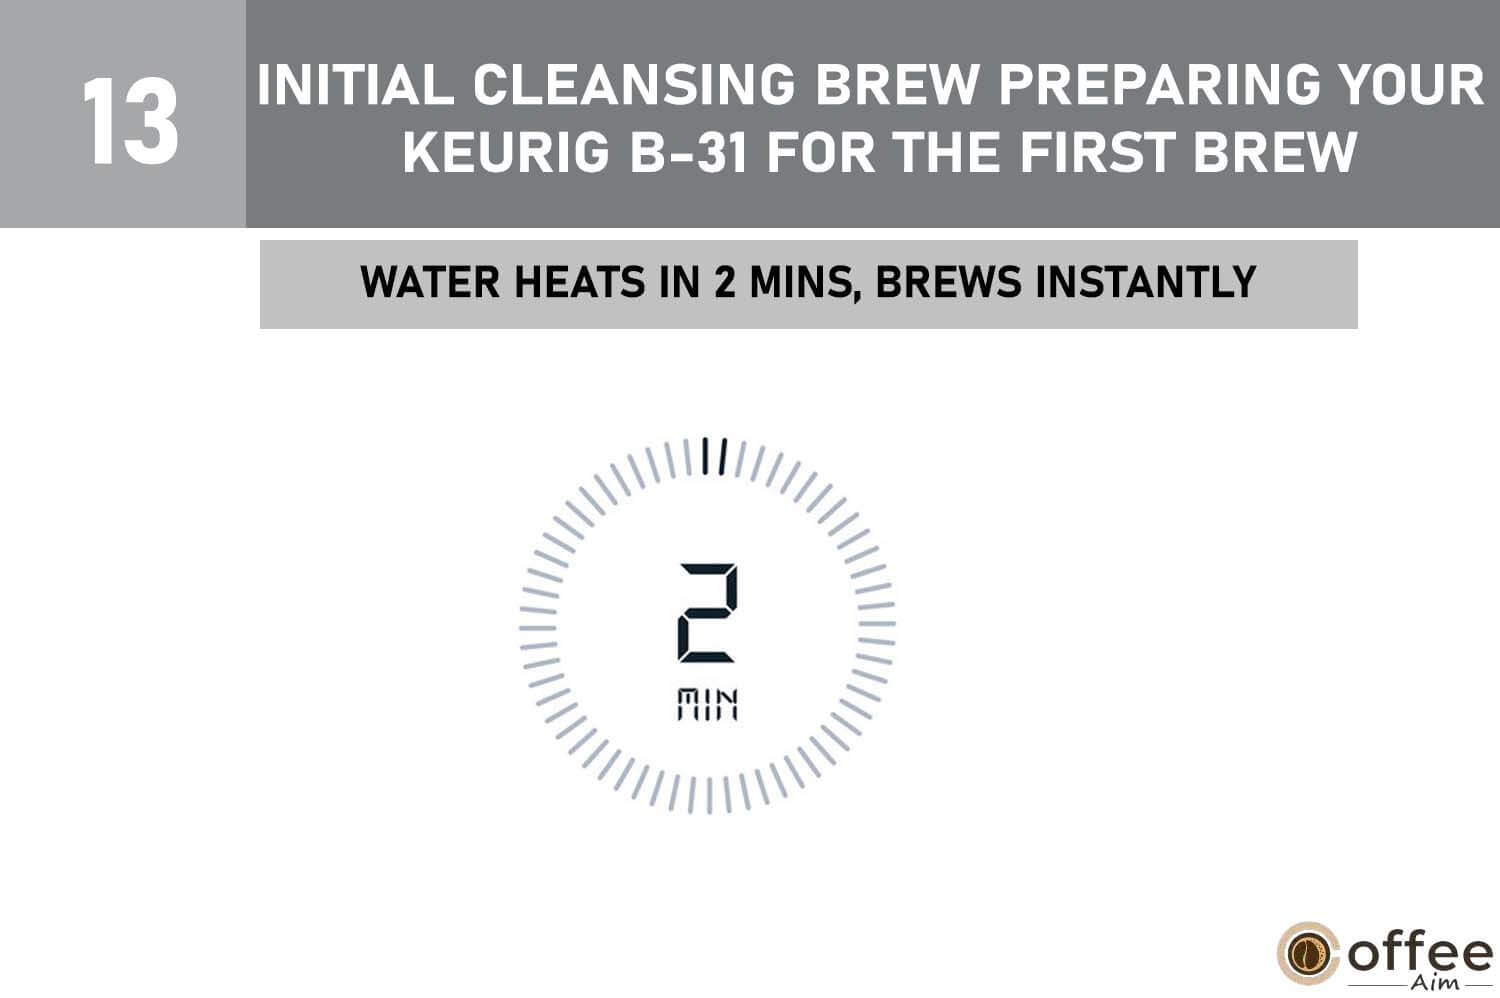 This image illustrates the rapid brewing process, delivering water in approximately 2 minutes for instant brewing, as part of the initial cleansing brew while preparing your Keurig B-31 for its first use